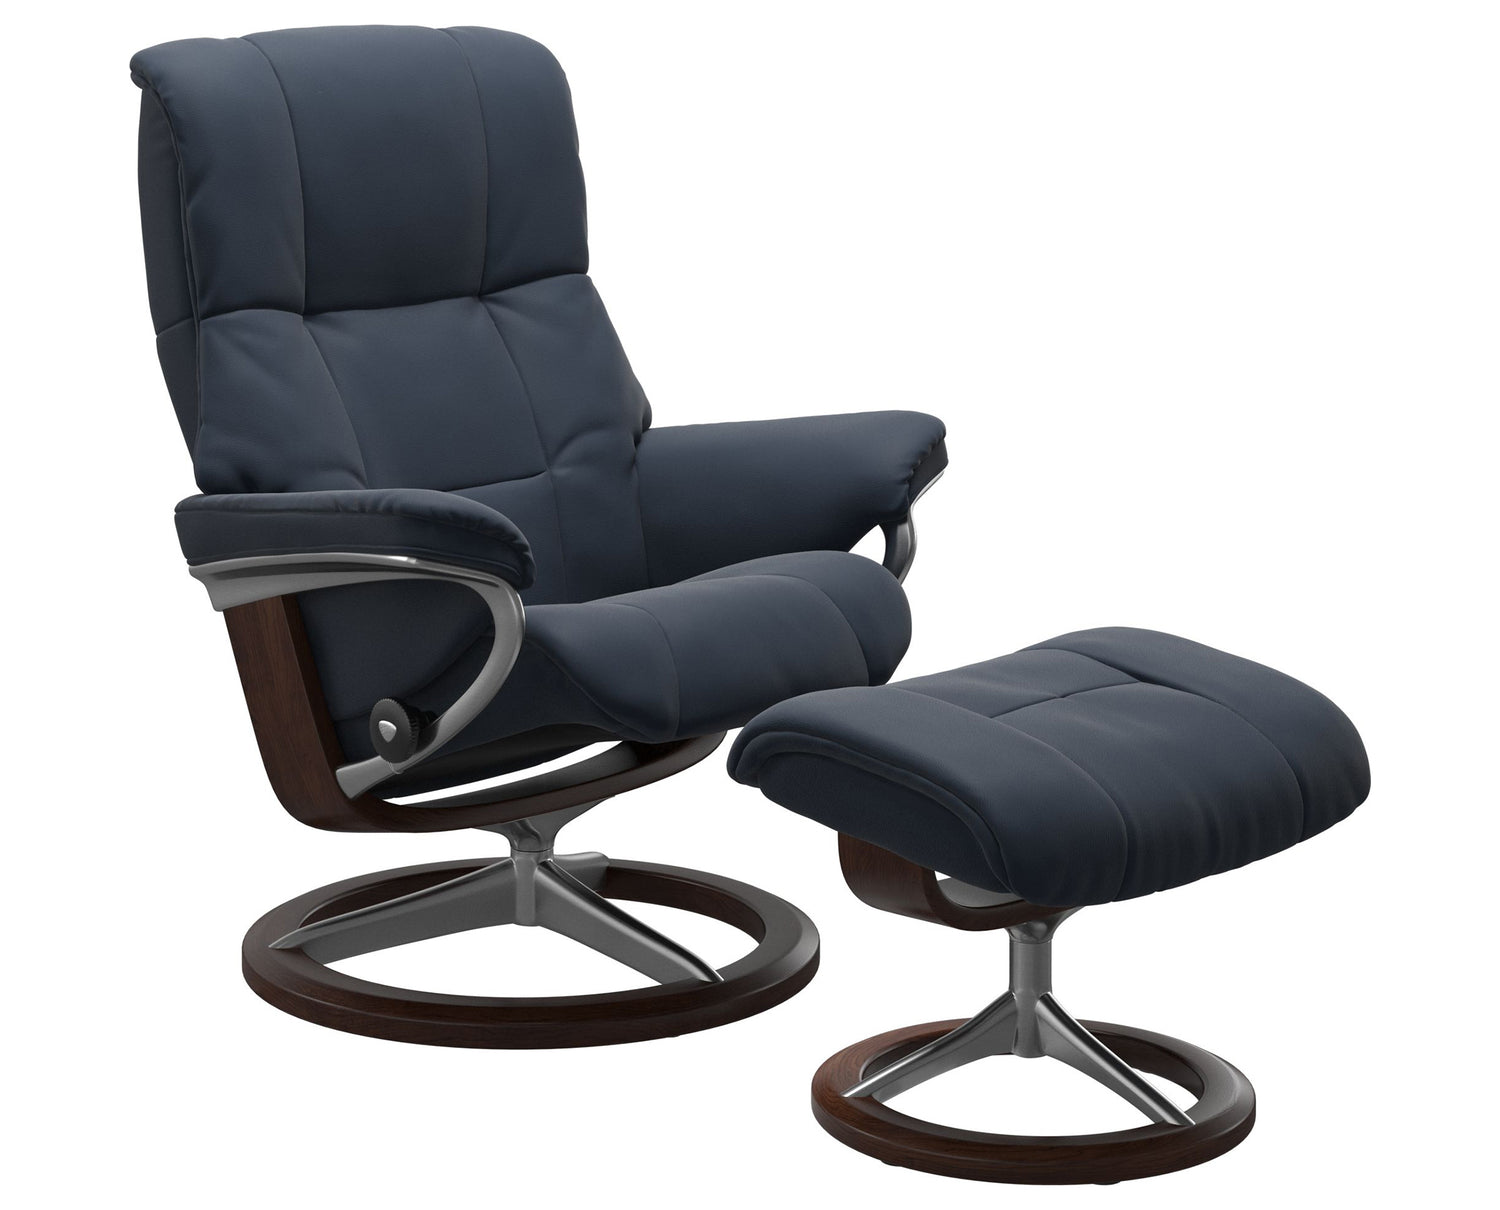 Paloma Leather Oxford Blue S/M/L & Brown Base | Stressless Mayfair Signature Recliner | Valley Ridge Furniture